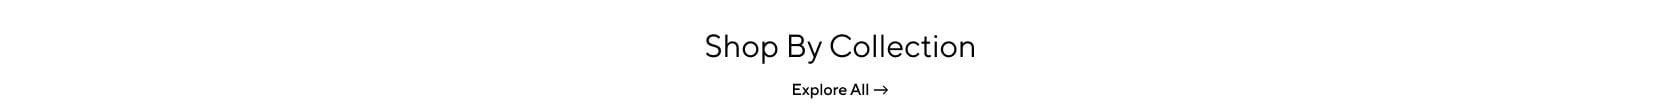 Explore All Collections